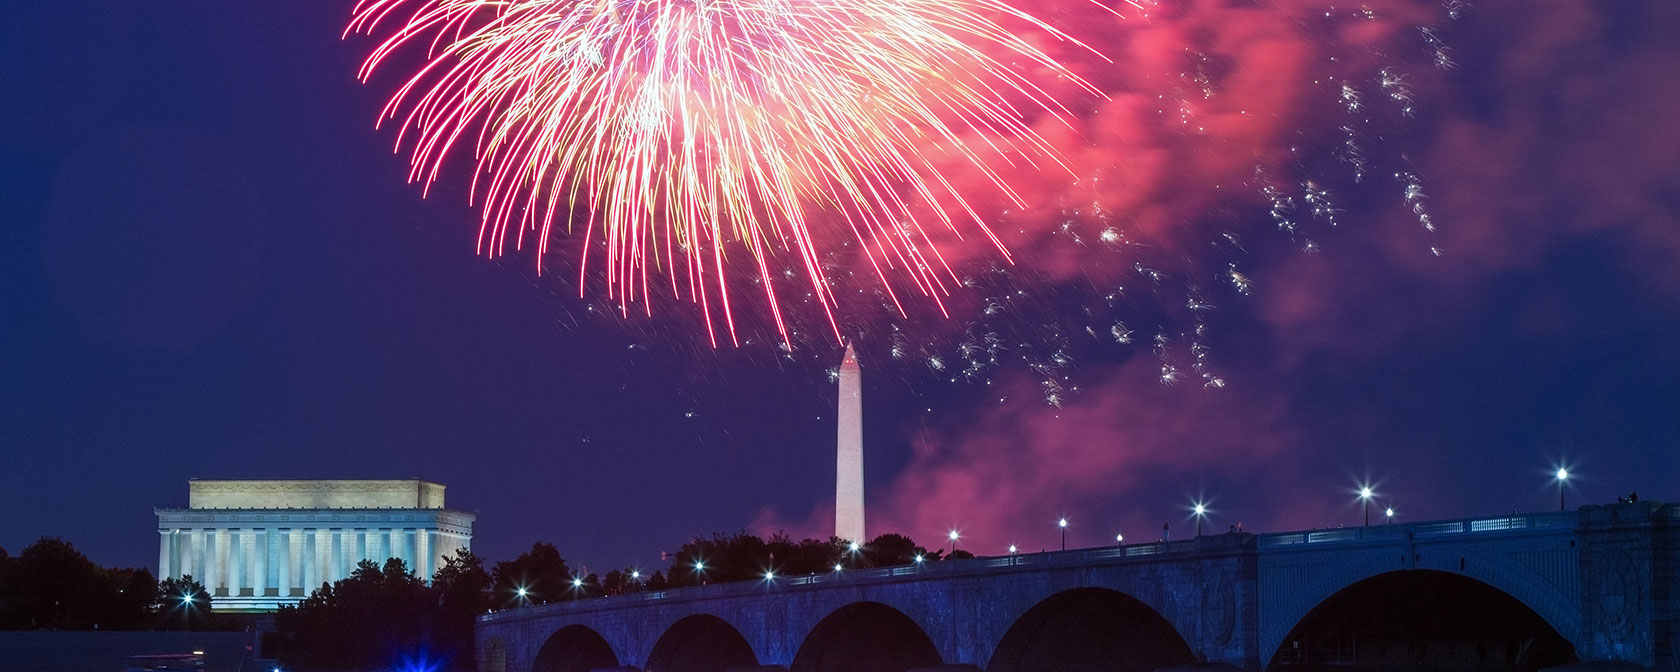 Guide to July 4th Fireworks in DC Best Viewing Spots & More